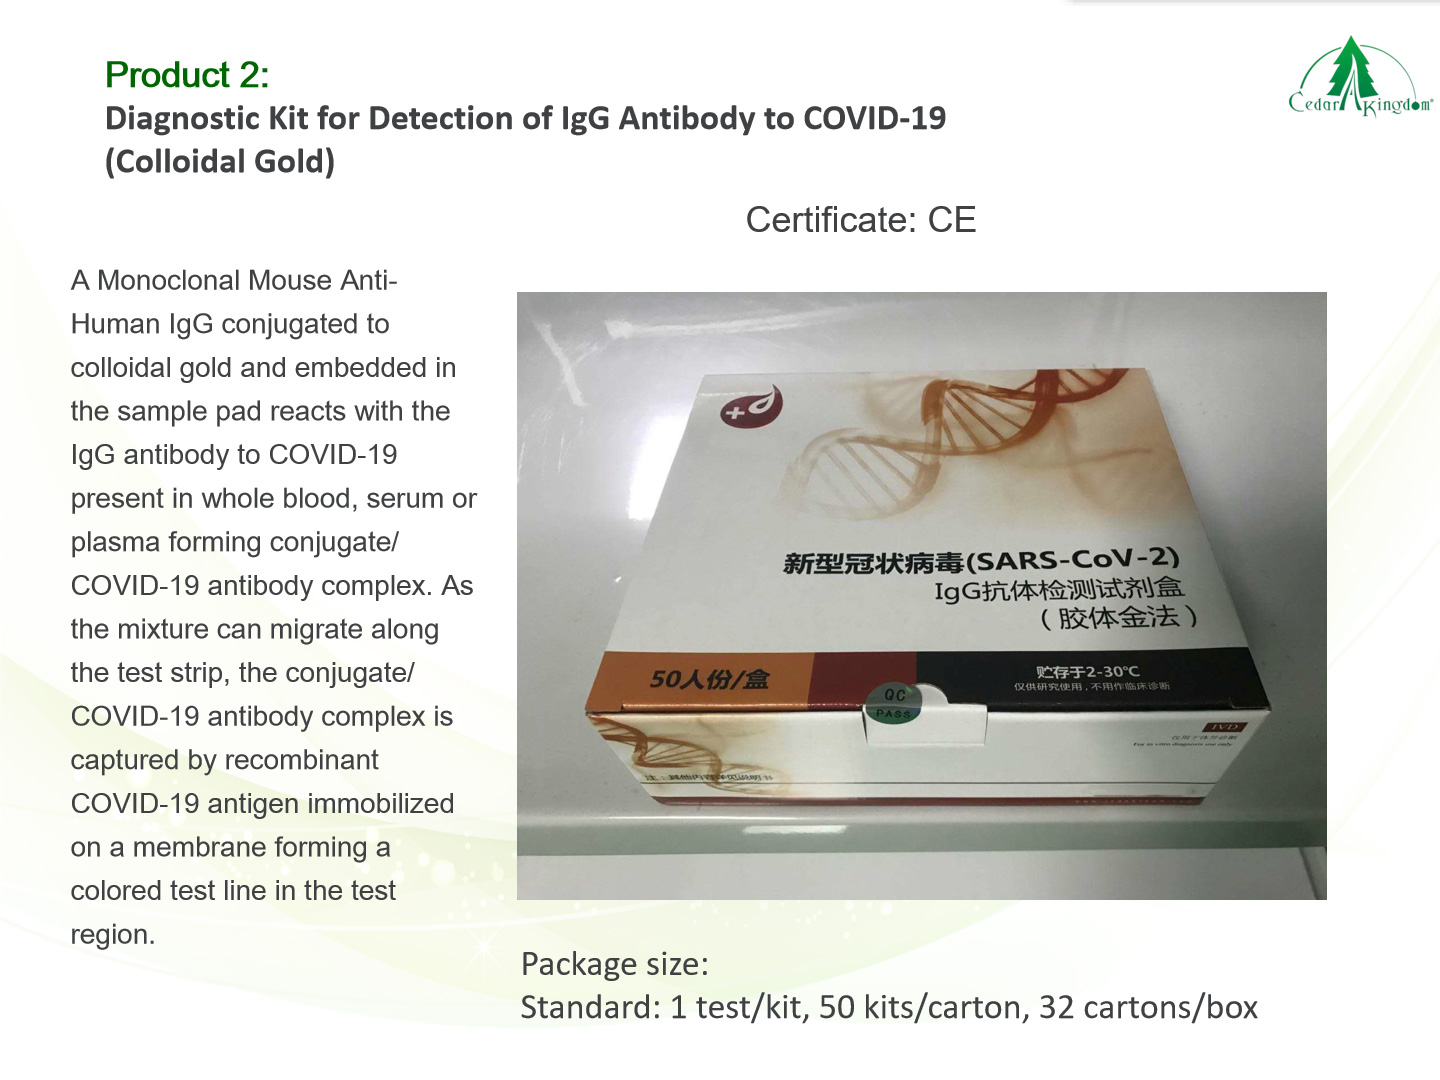 Diagnostic-Kit-for-Detection-of-IgG-Antibody-to-COVID-19